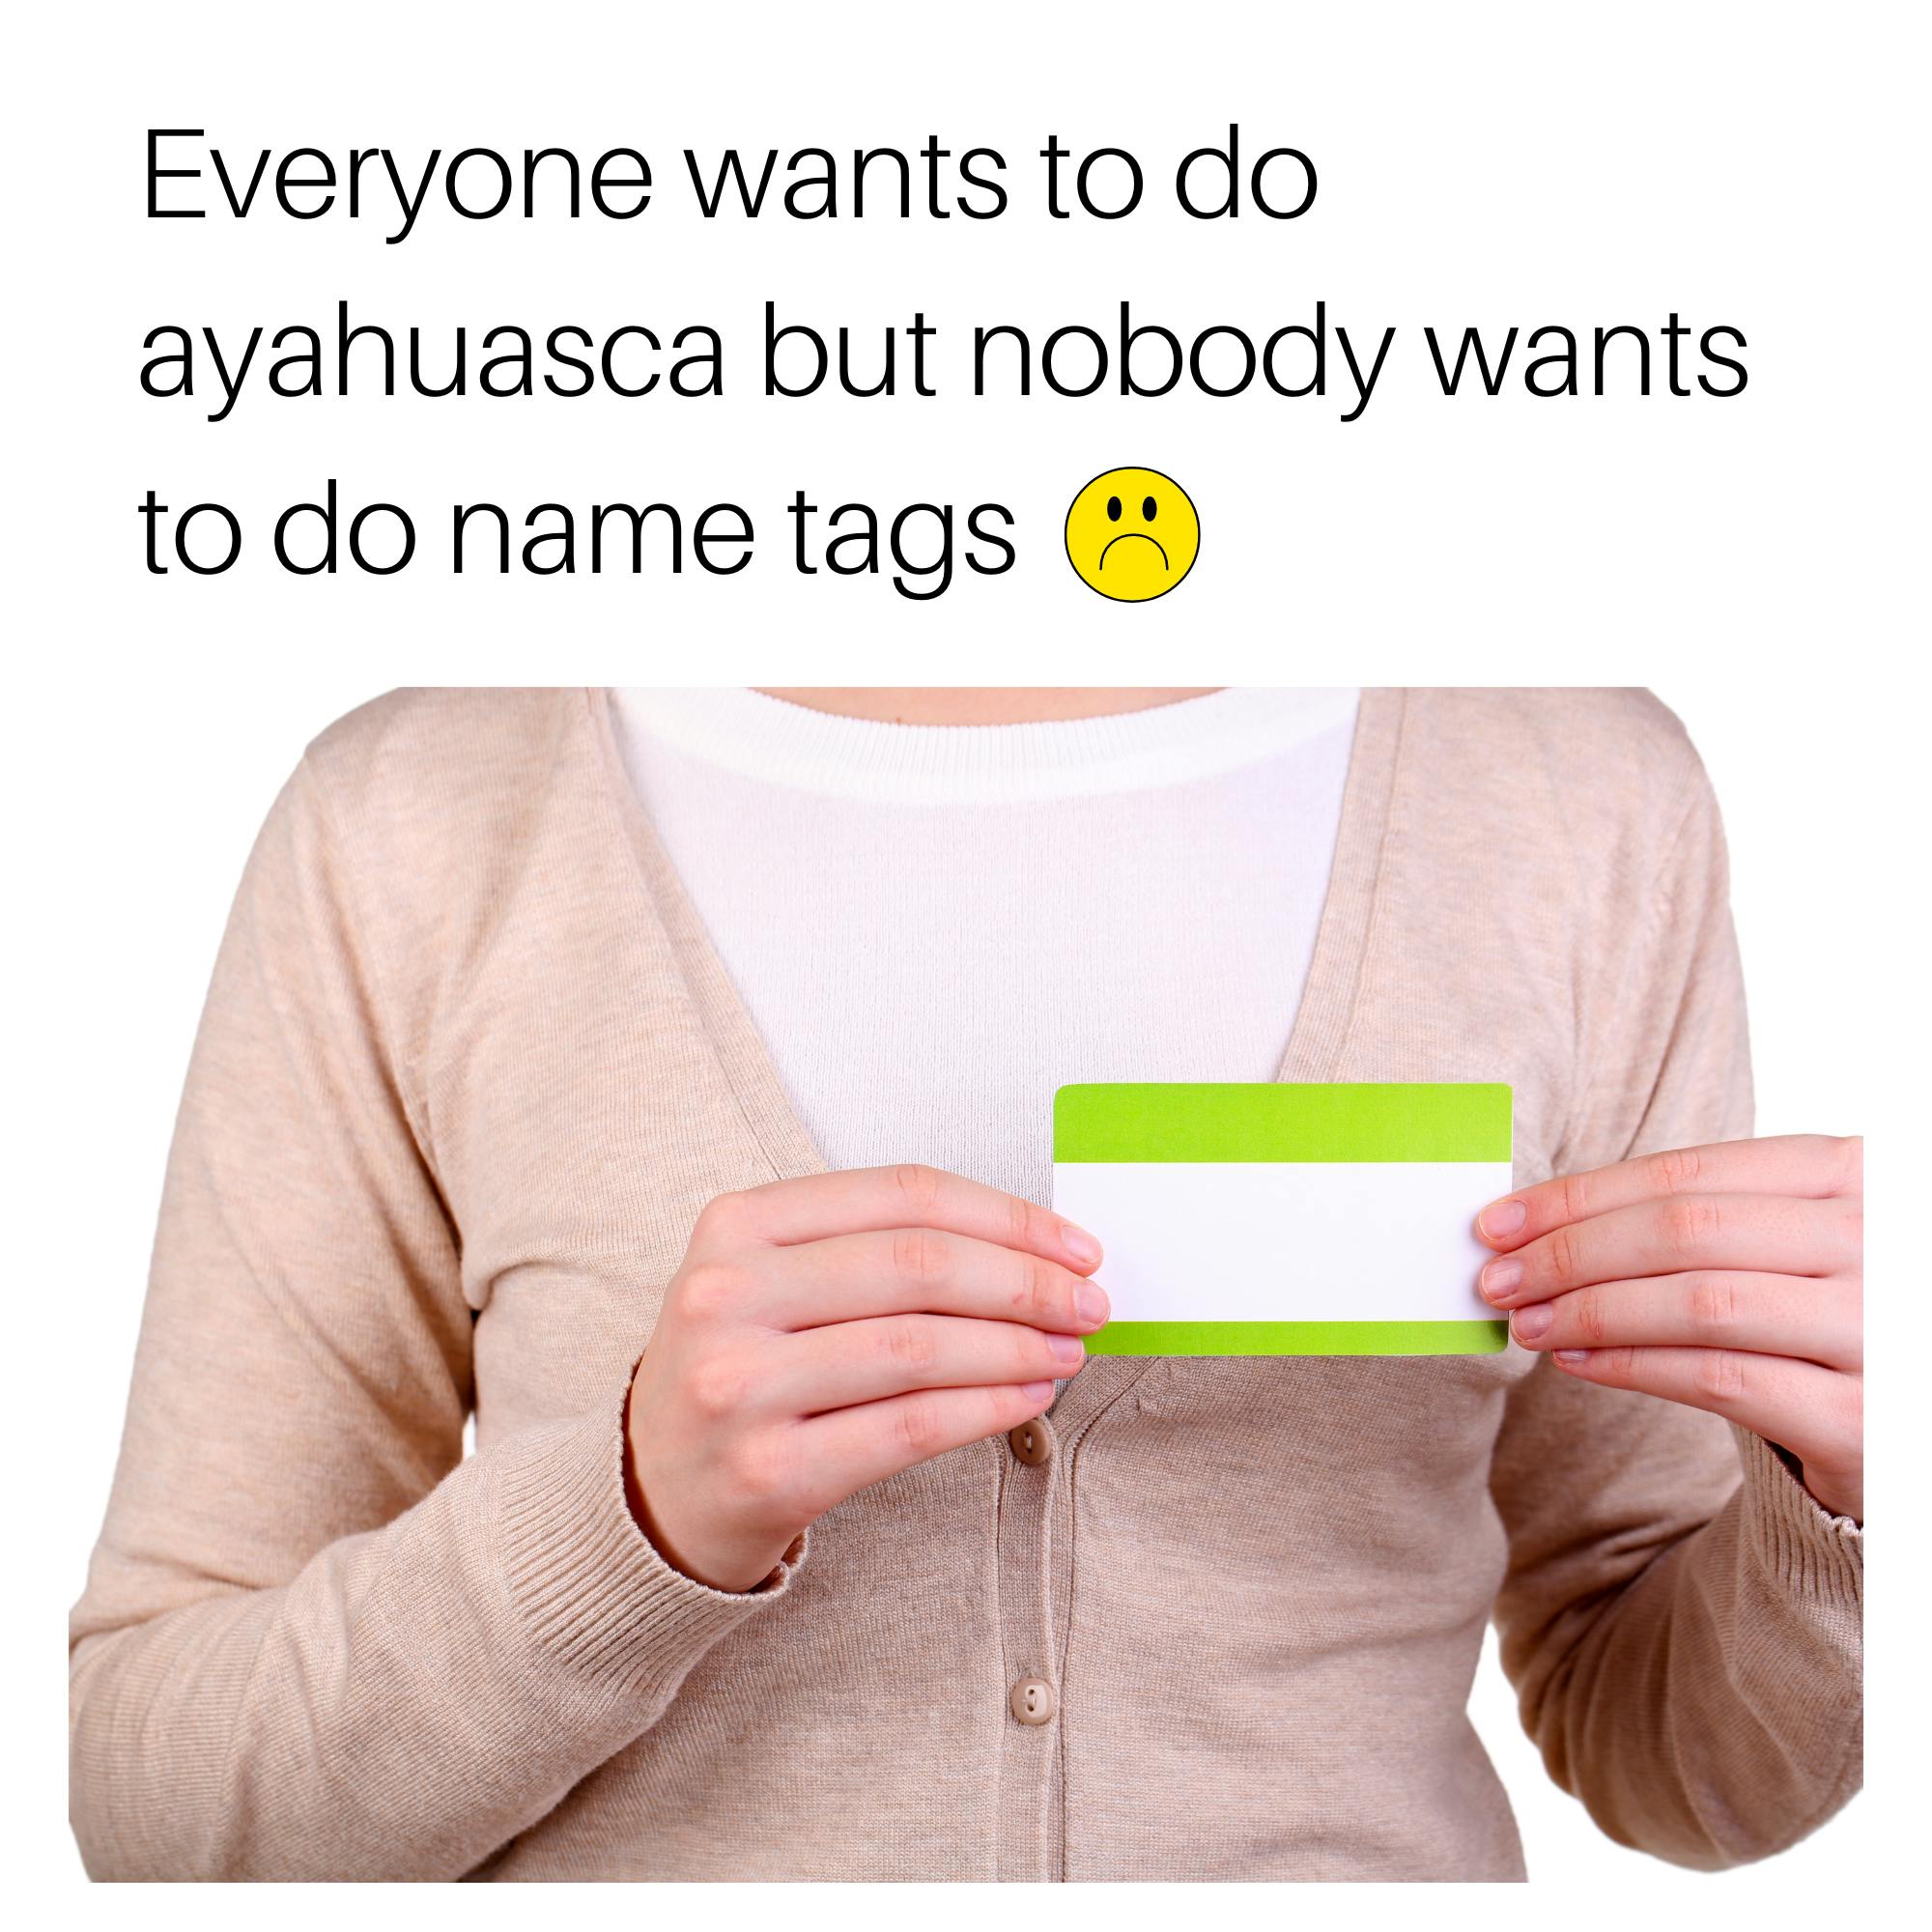 header text: everyone wants to do ayahuasca but nobody wants to do name tags